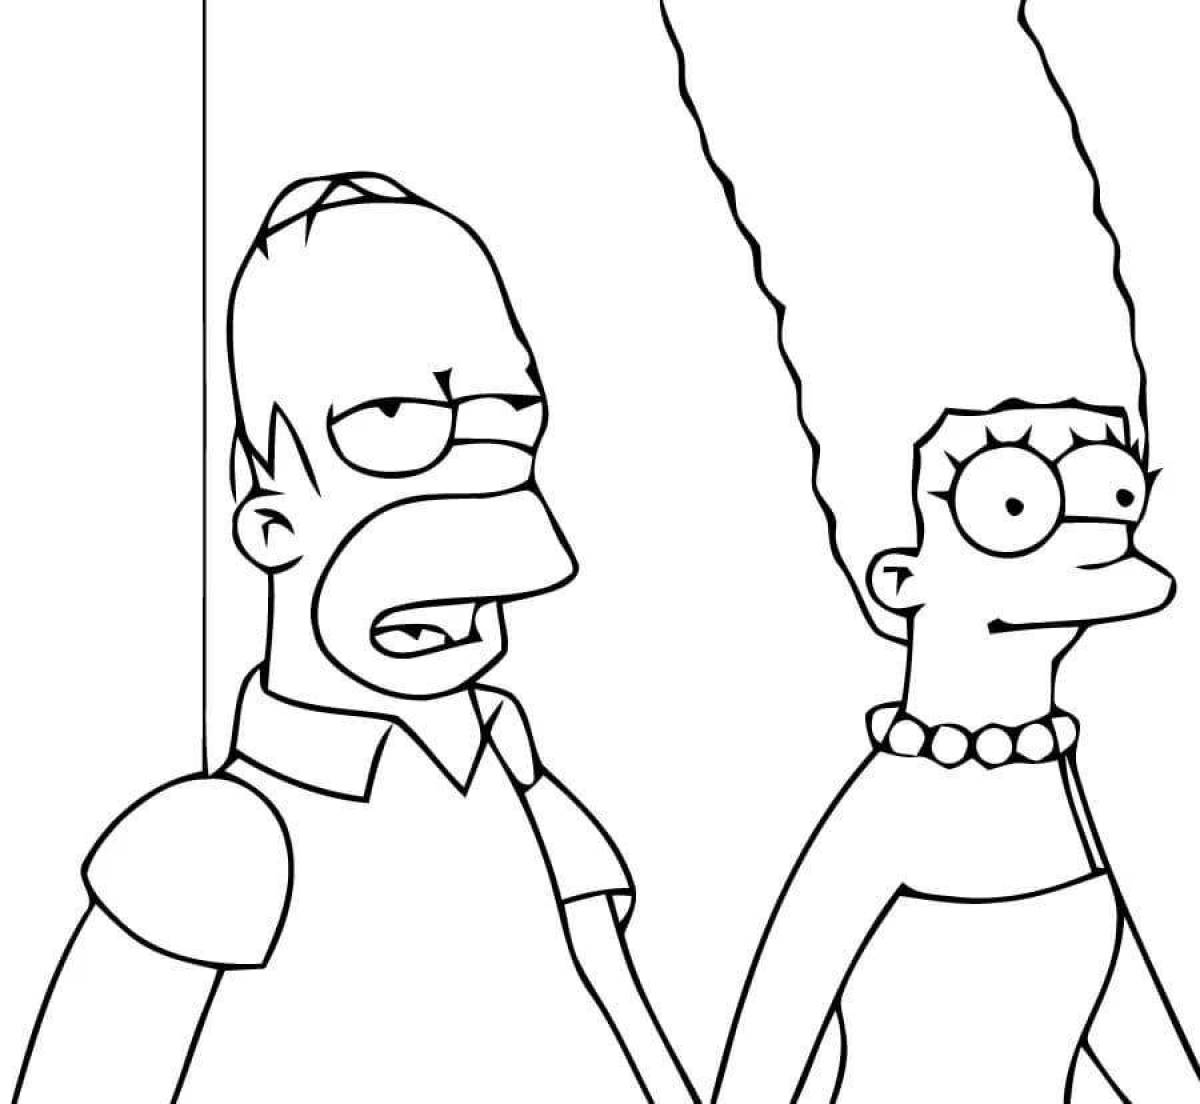 Marge simpson shining coloring book